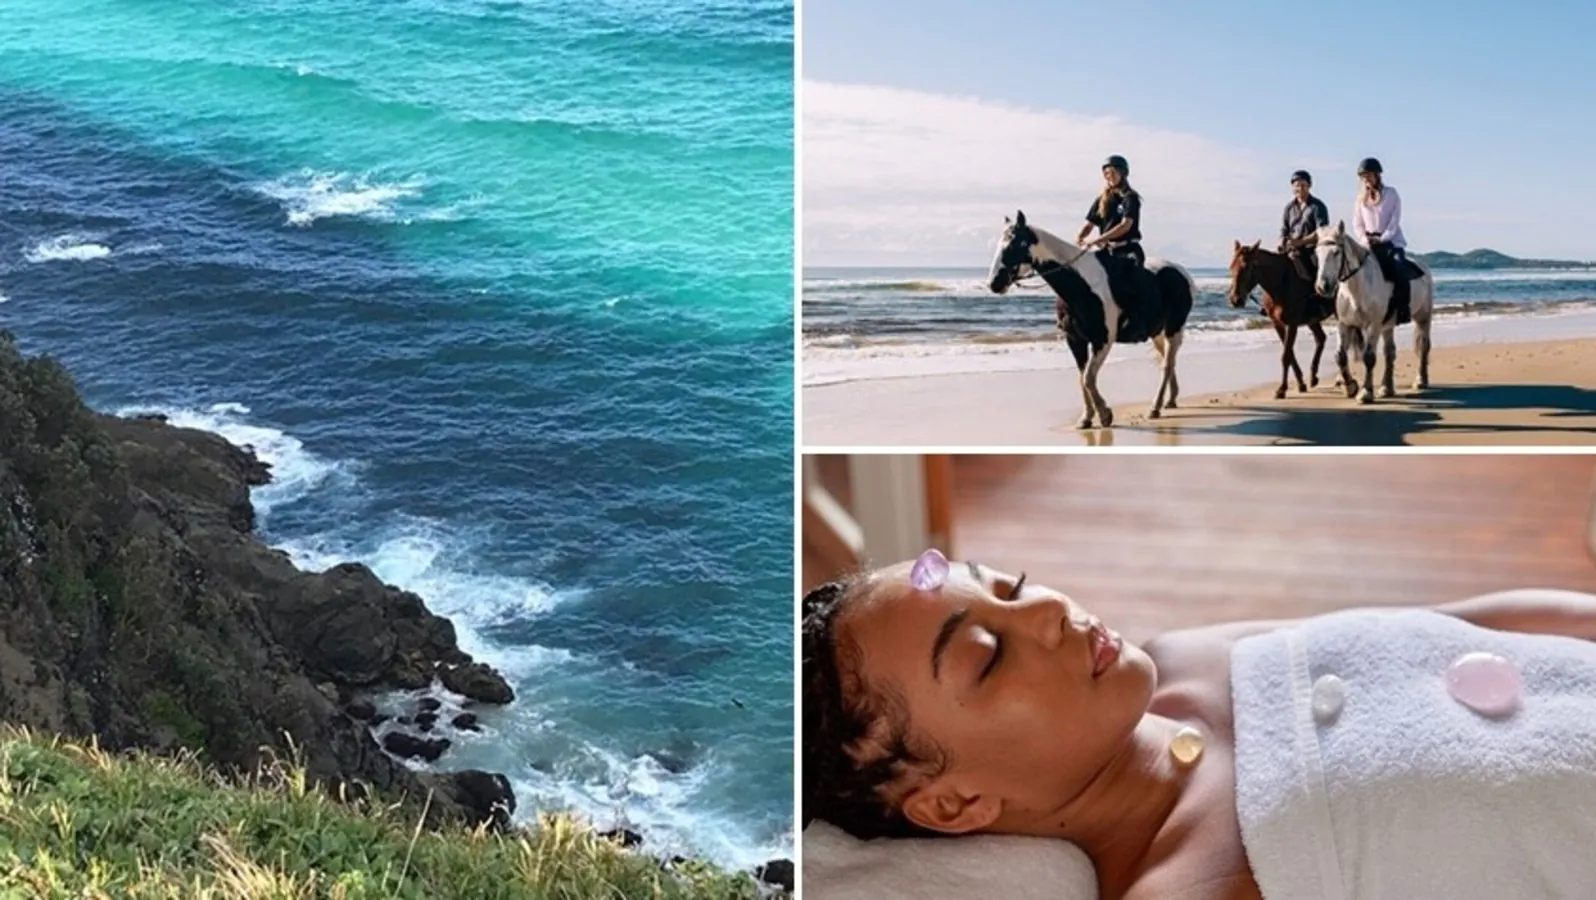 Byron Bay: A serene destination in Australia to recharge your senses